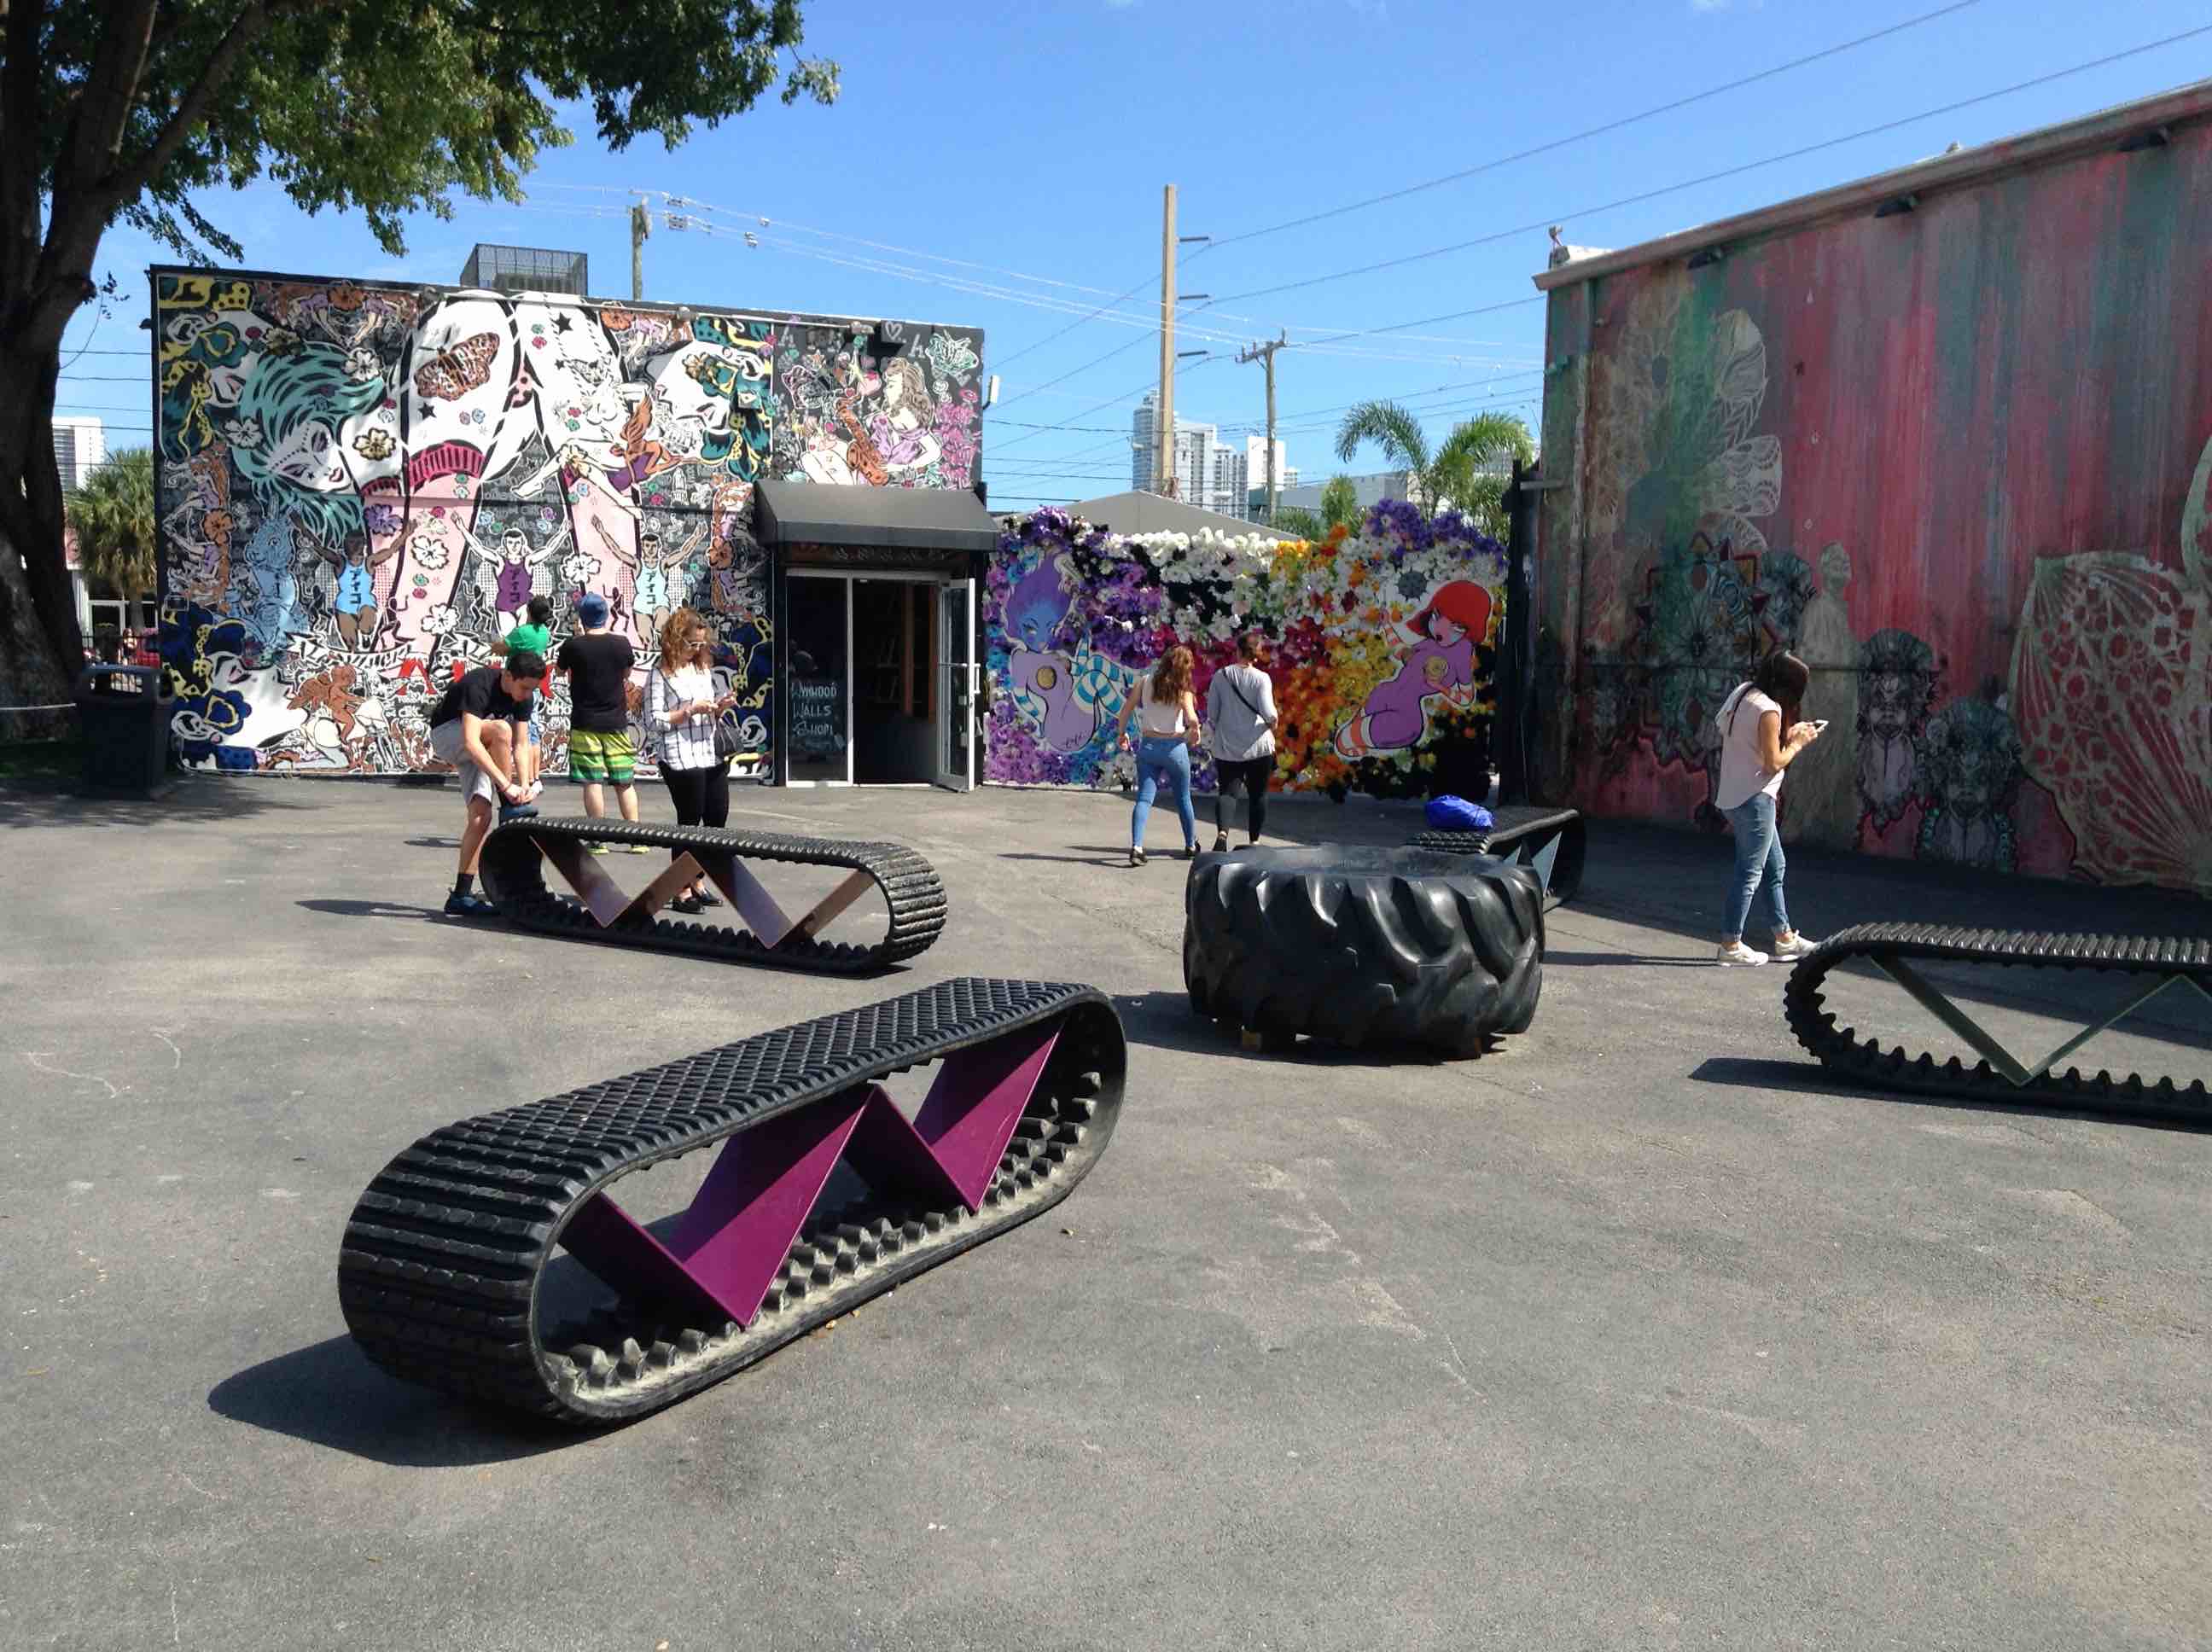 Old truck tyres as public benches